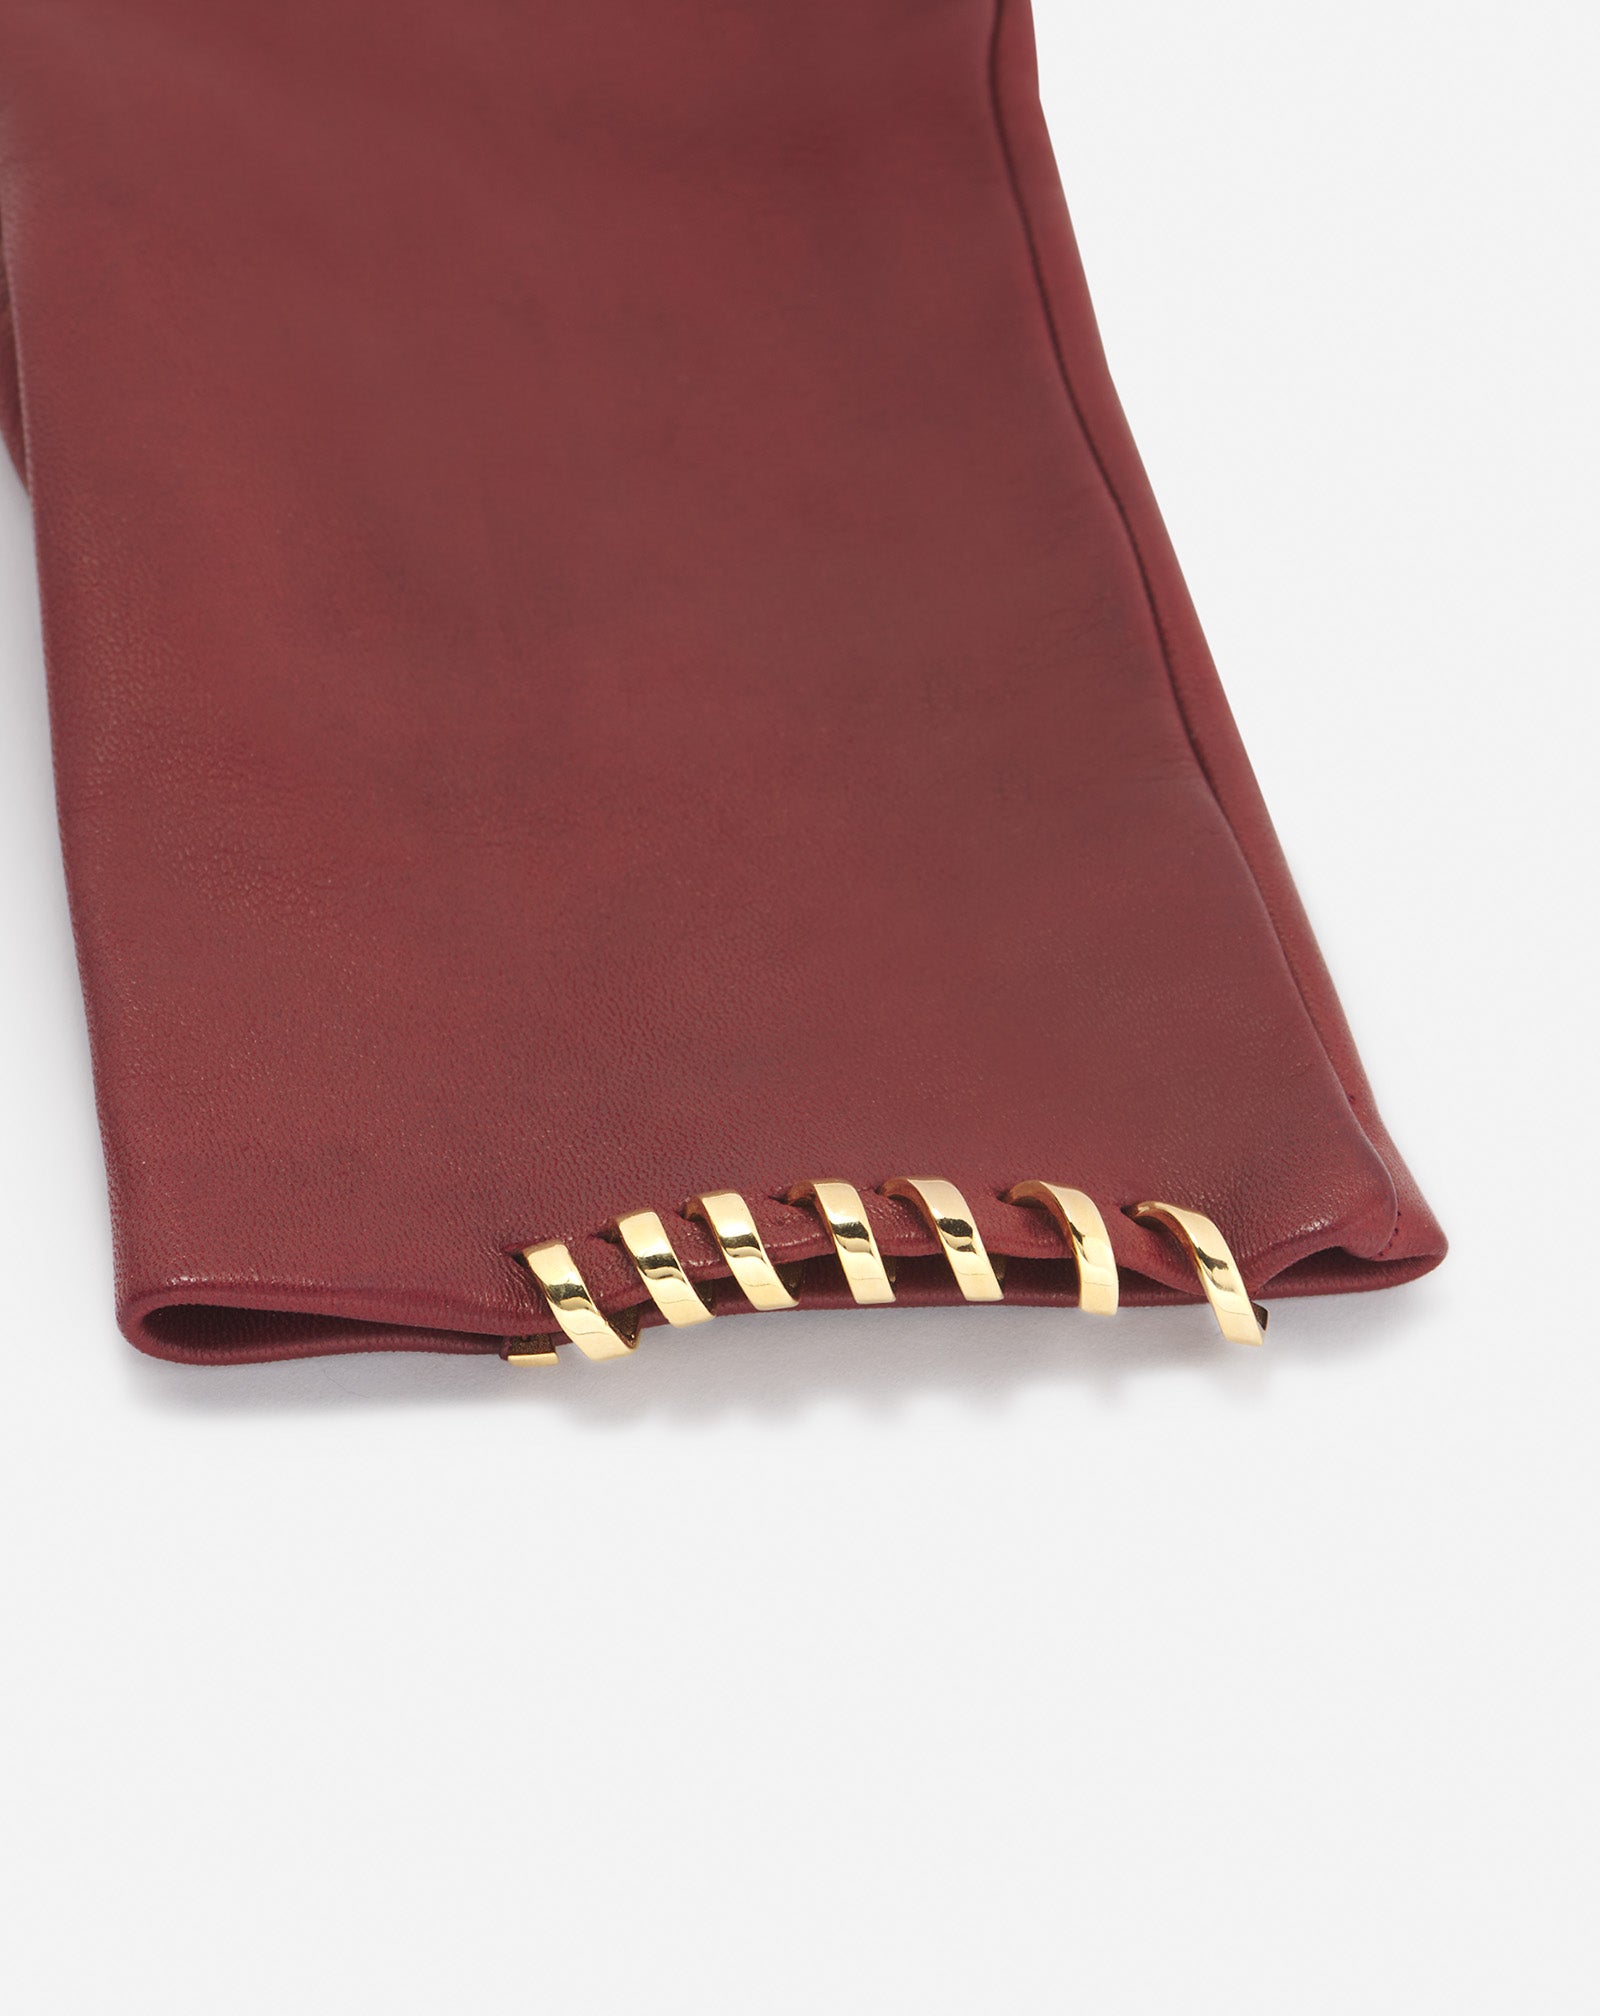 SEQUENCE BY LANVIN LEATHER GLOVES, BURGUNDY